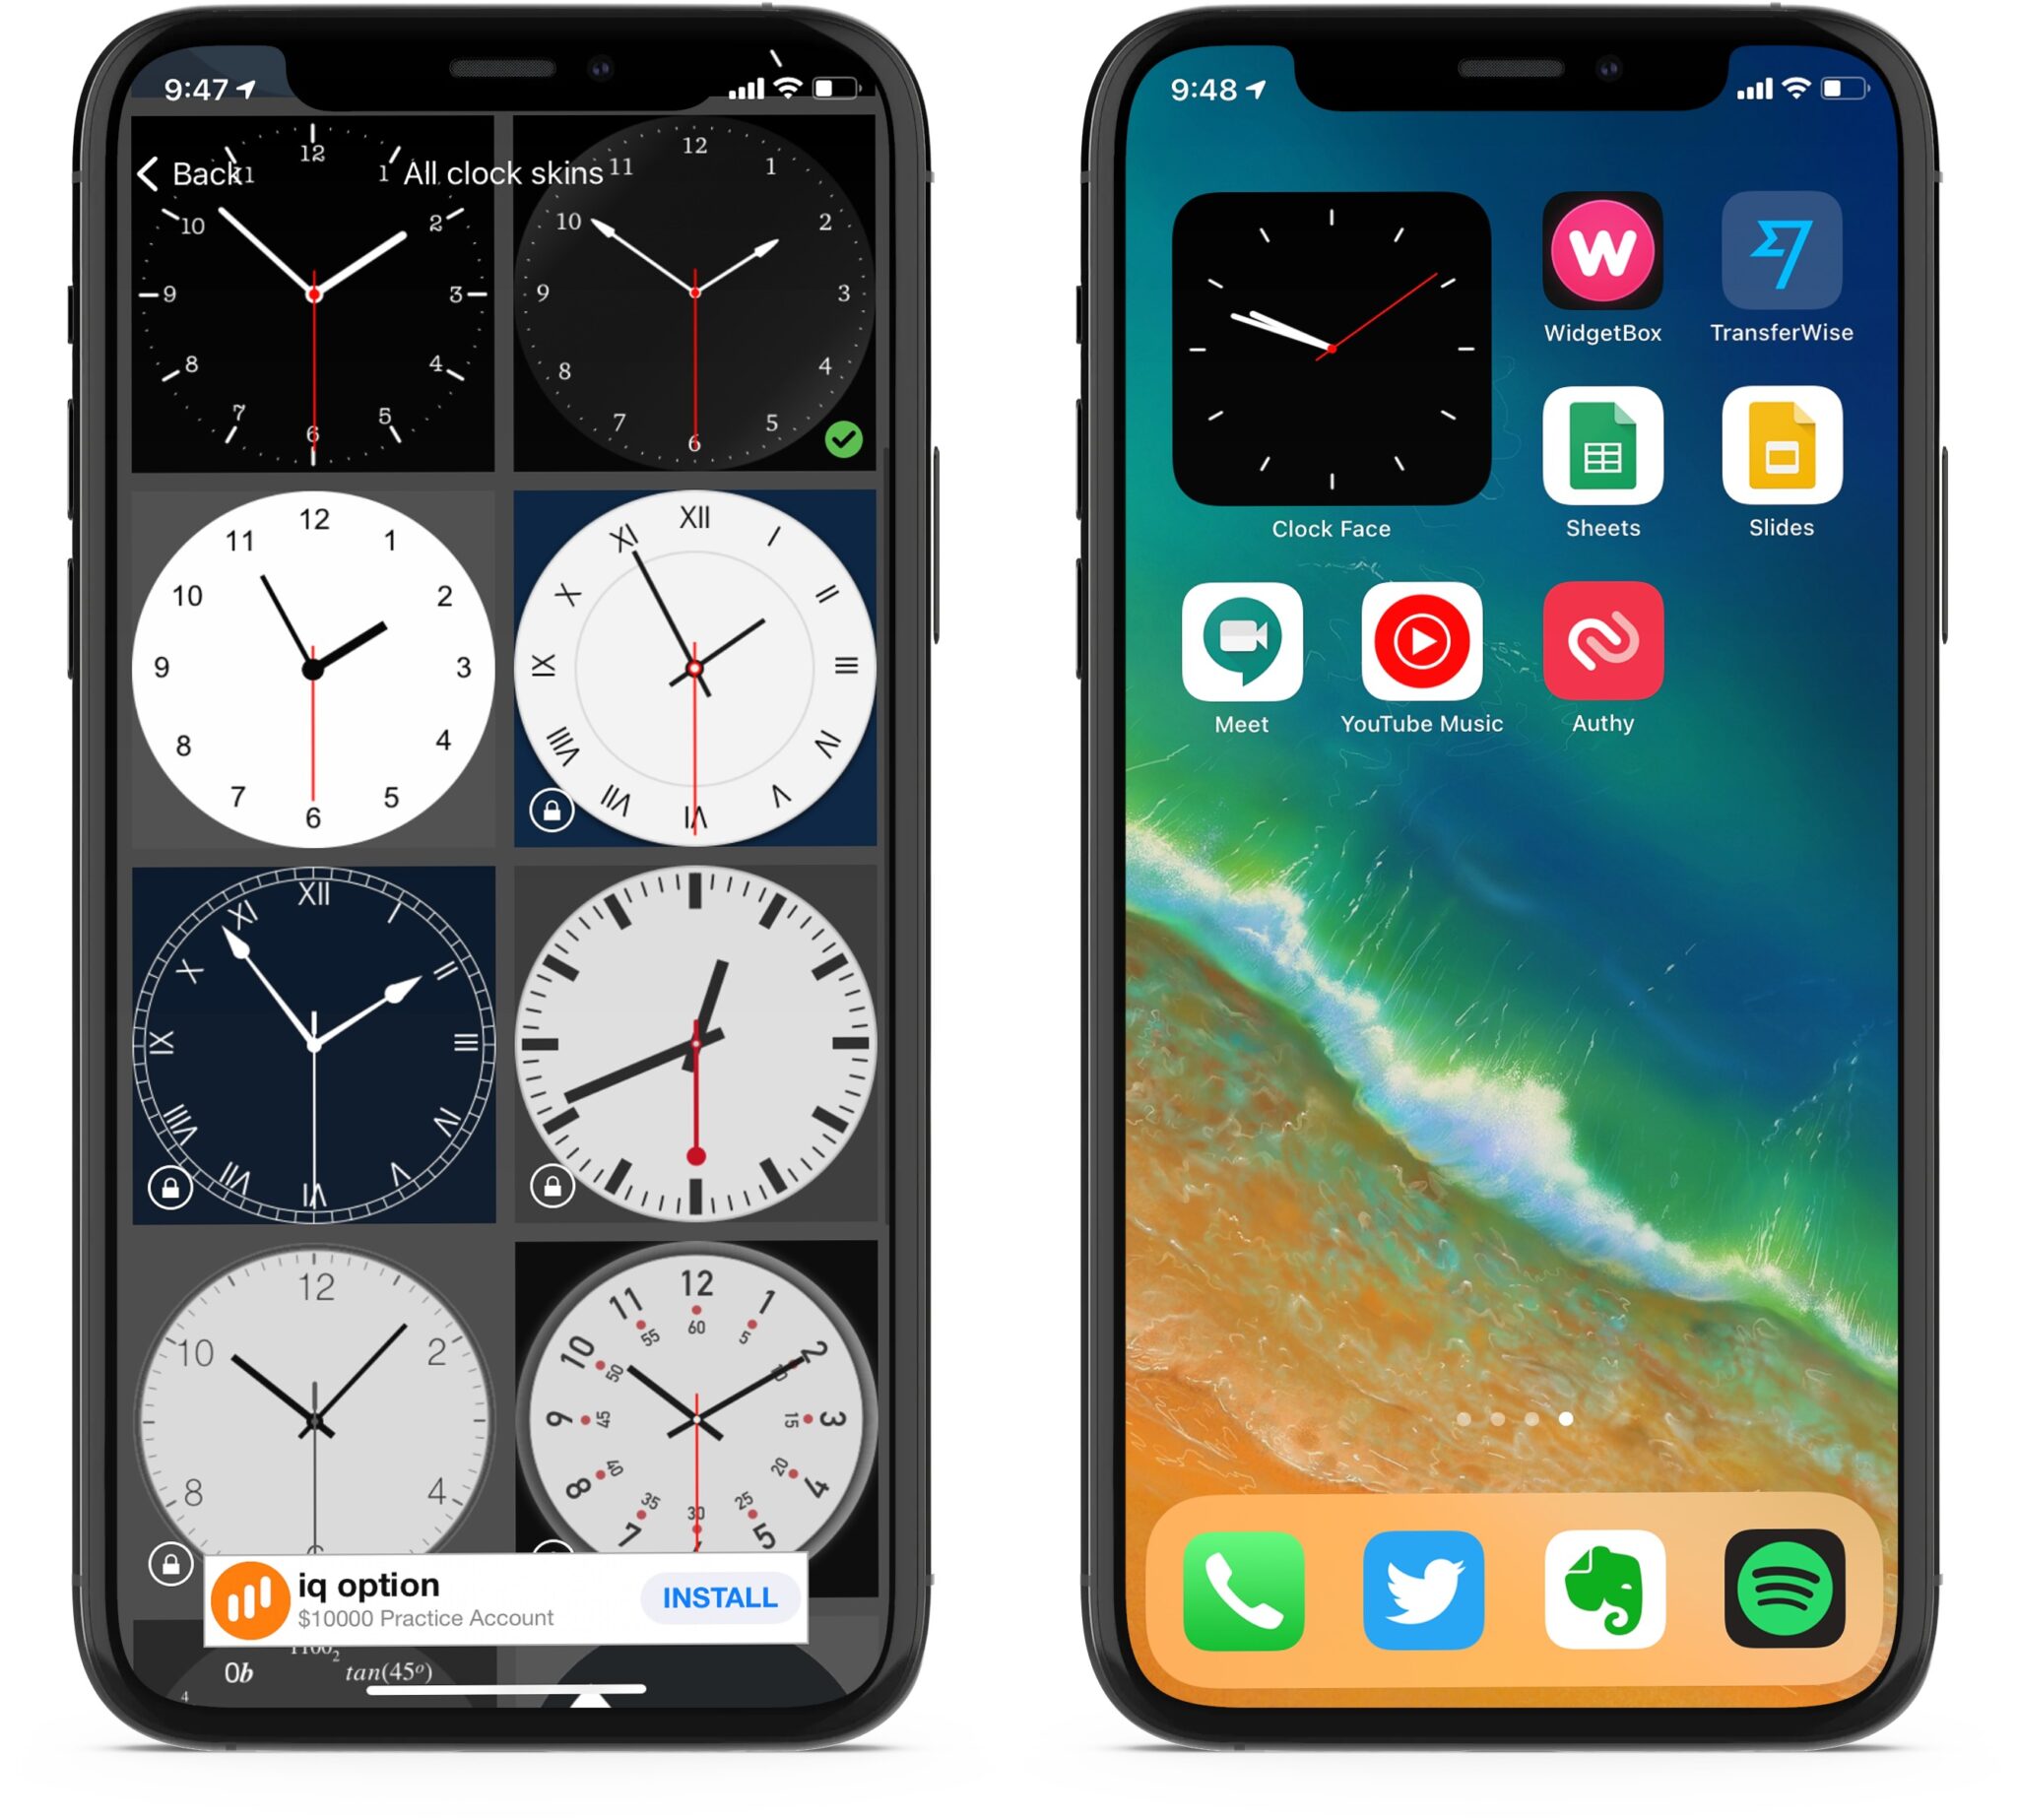 The Best Clock And Weather Widgets For IPhone s Home Screen